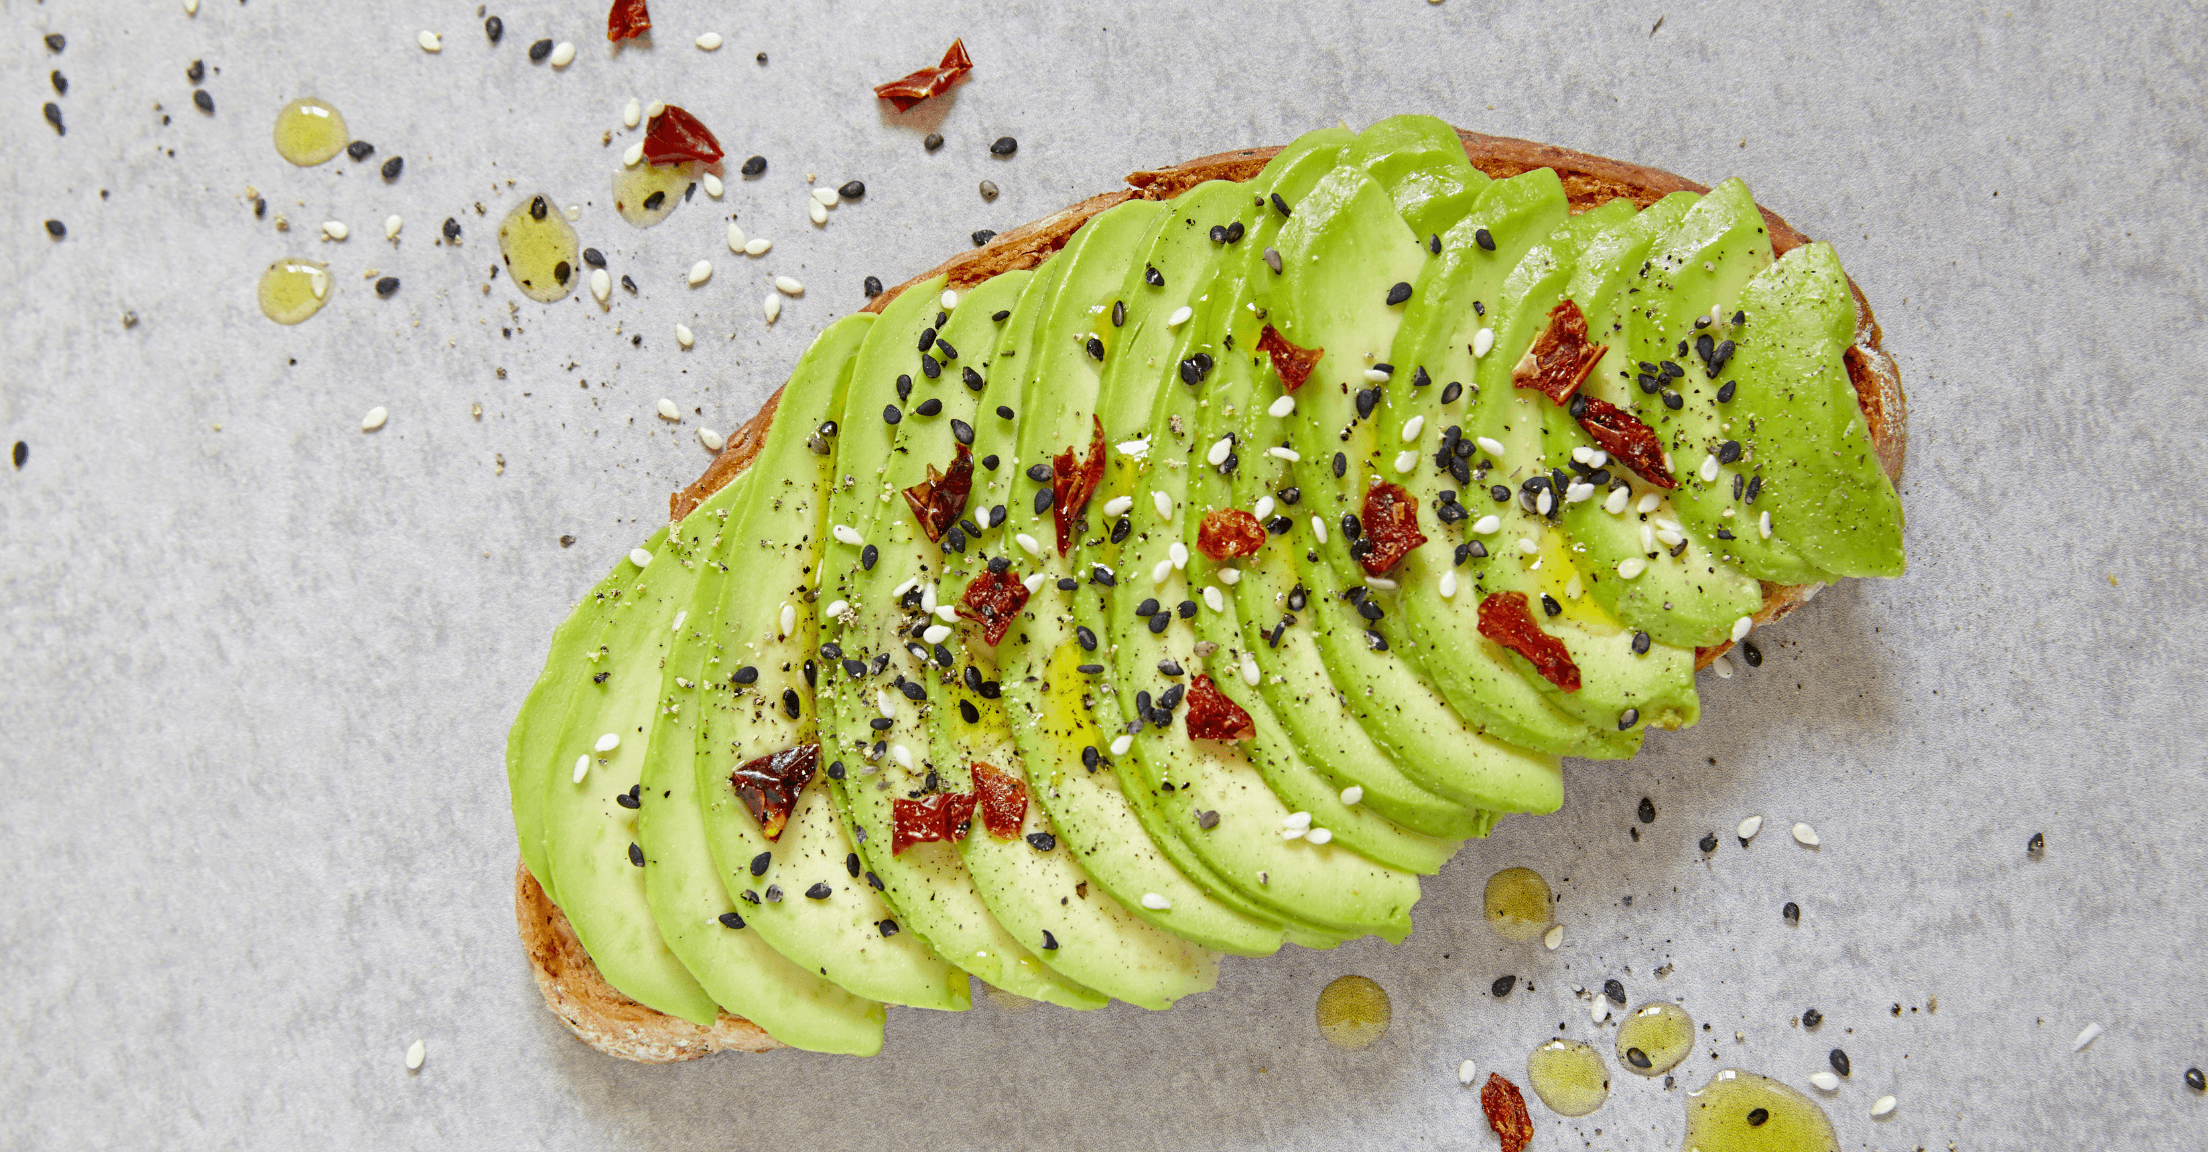 Avocado toast with sesame seeds and red pepper flakes, to indicate this post is about Millennials